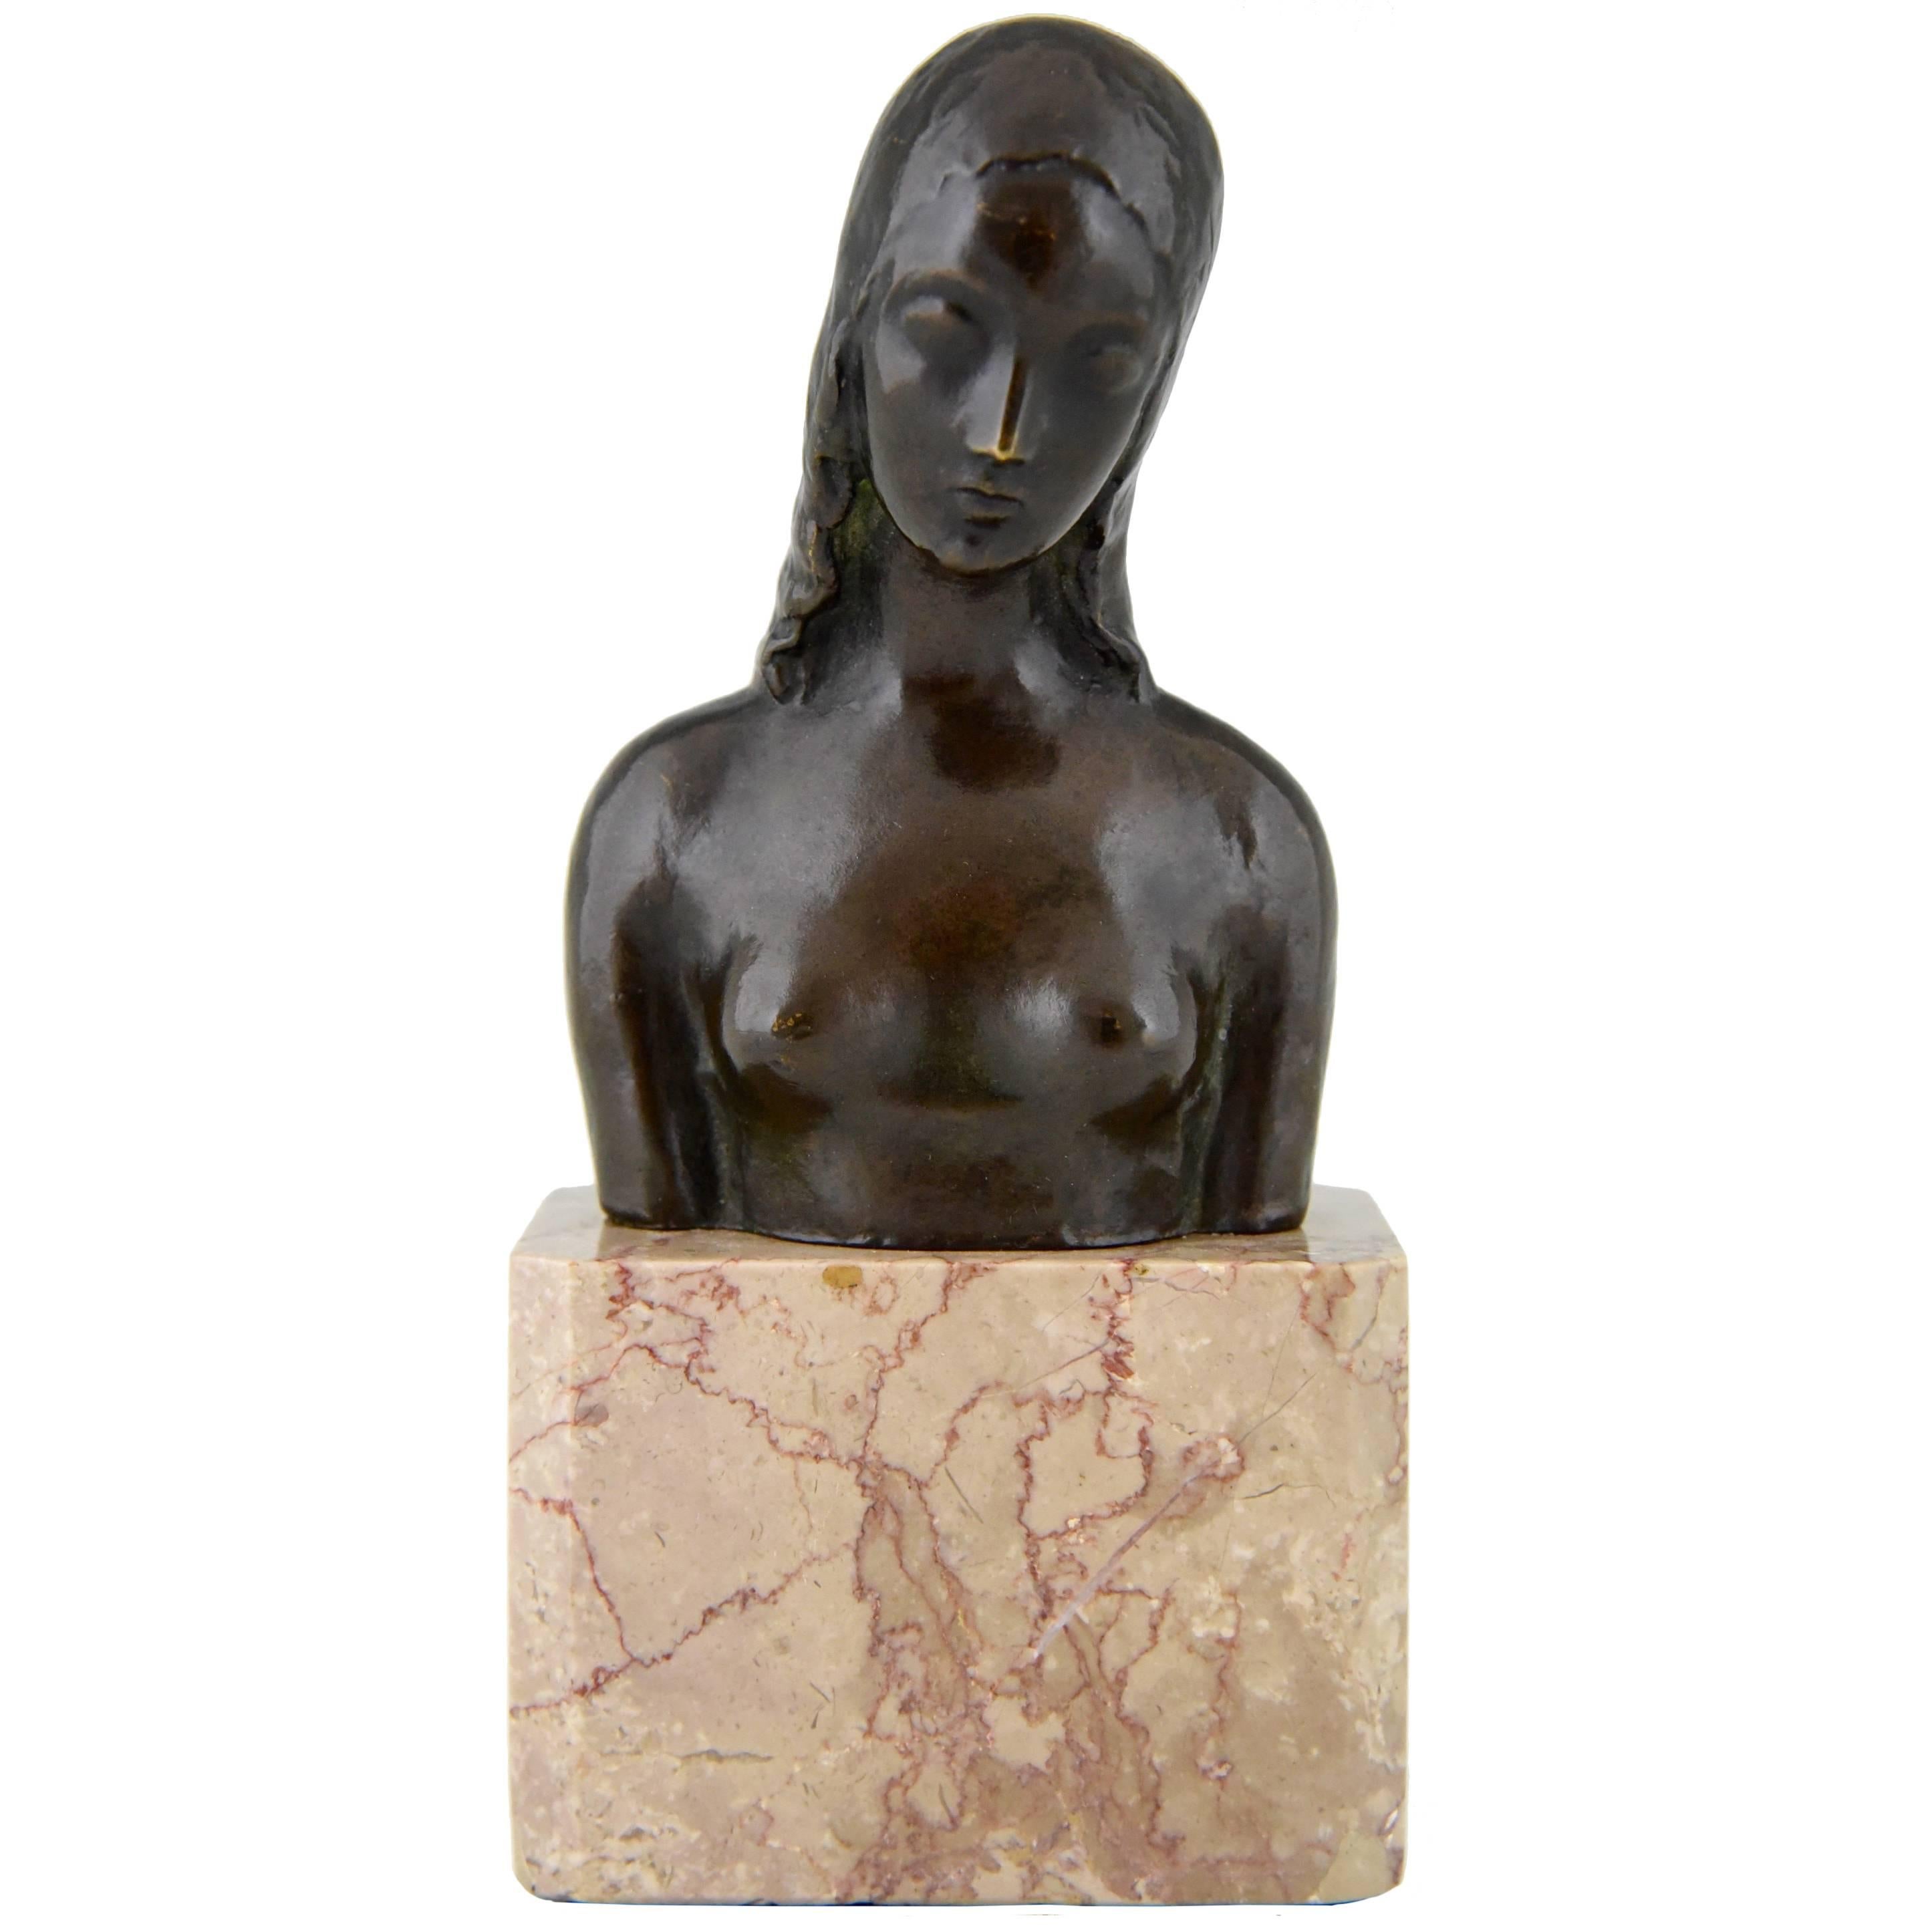 American Art Deco Bronze Bust of a Female Nude by Simon Moselsio 1930